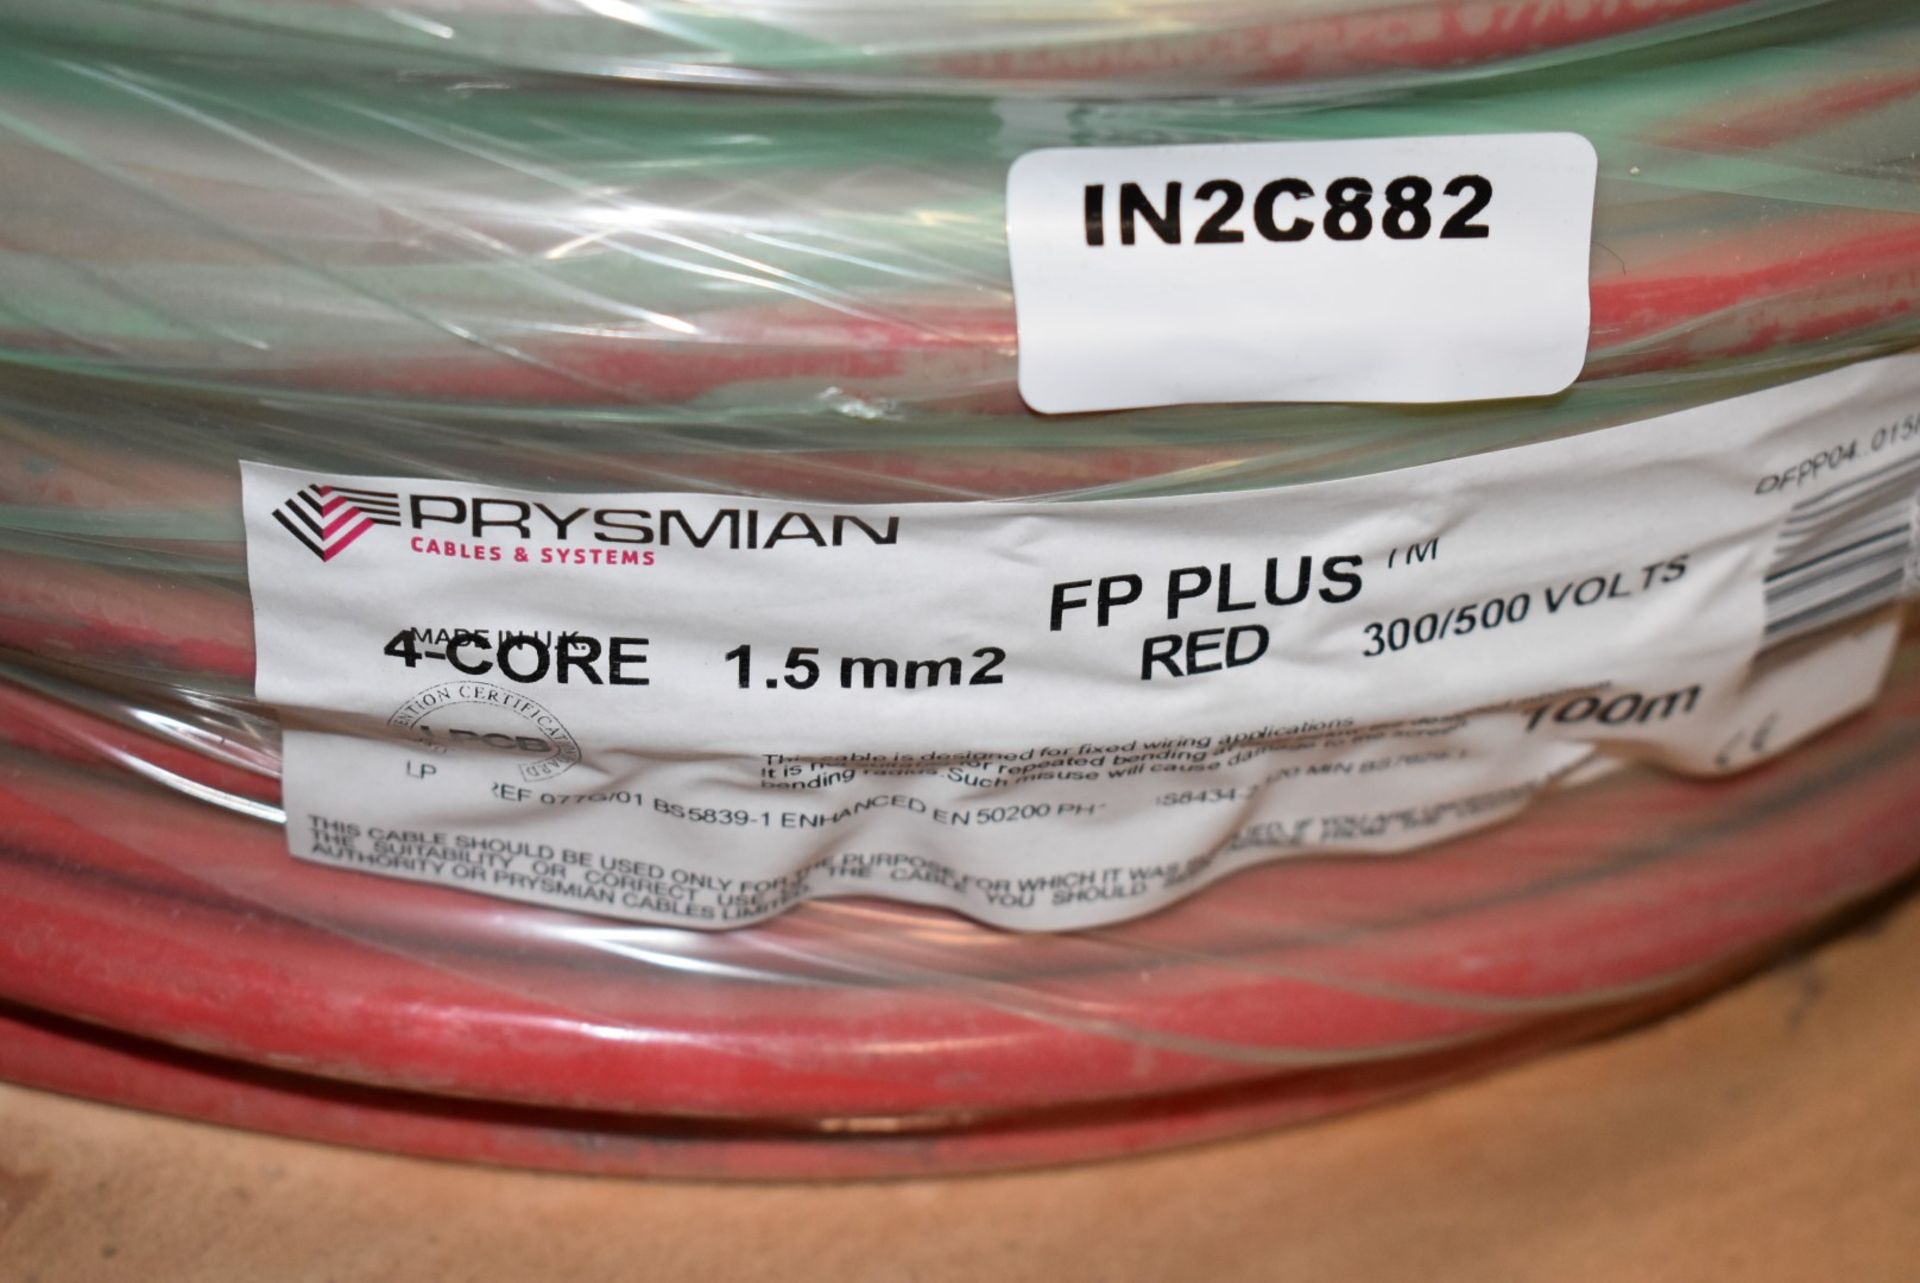 1 x Prysmian 100m FP Plus 4 Core 1.5mm2 Red Enhanced Fire Alarm Cable - 300/500v - RRP £360 - Image 3 of 5